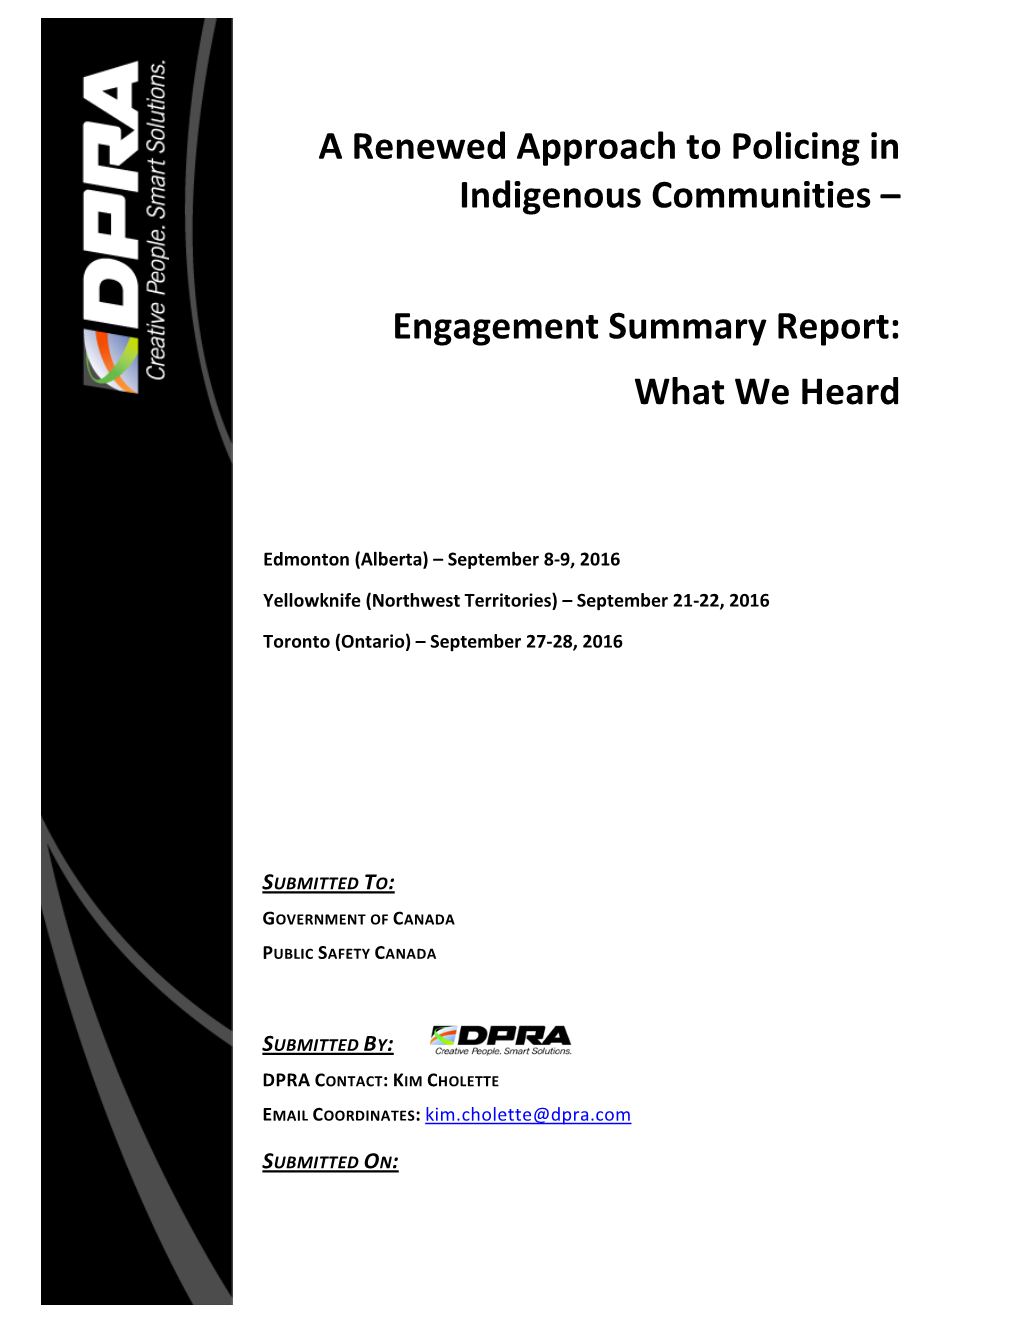 A Renewed Approach to Policing in Indigenous Communities –